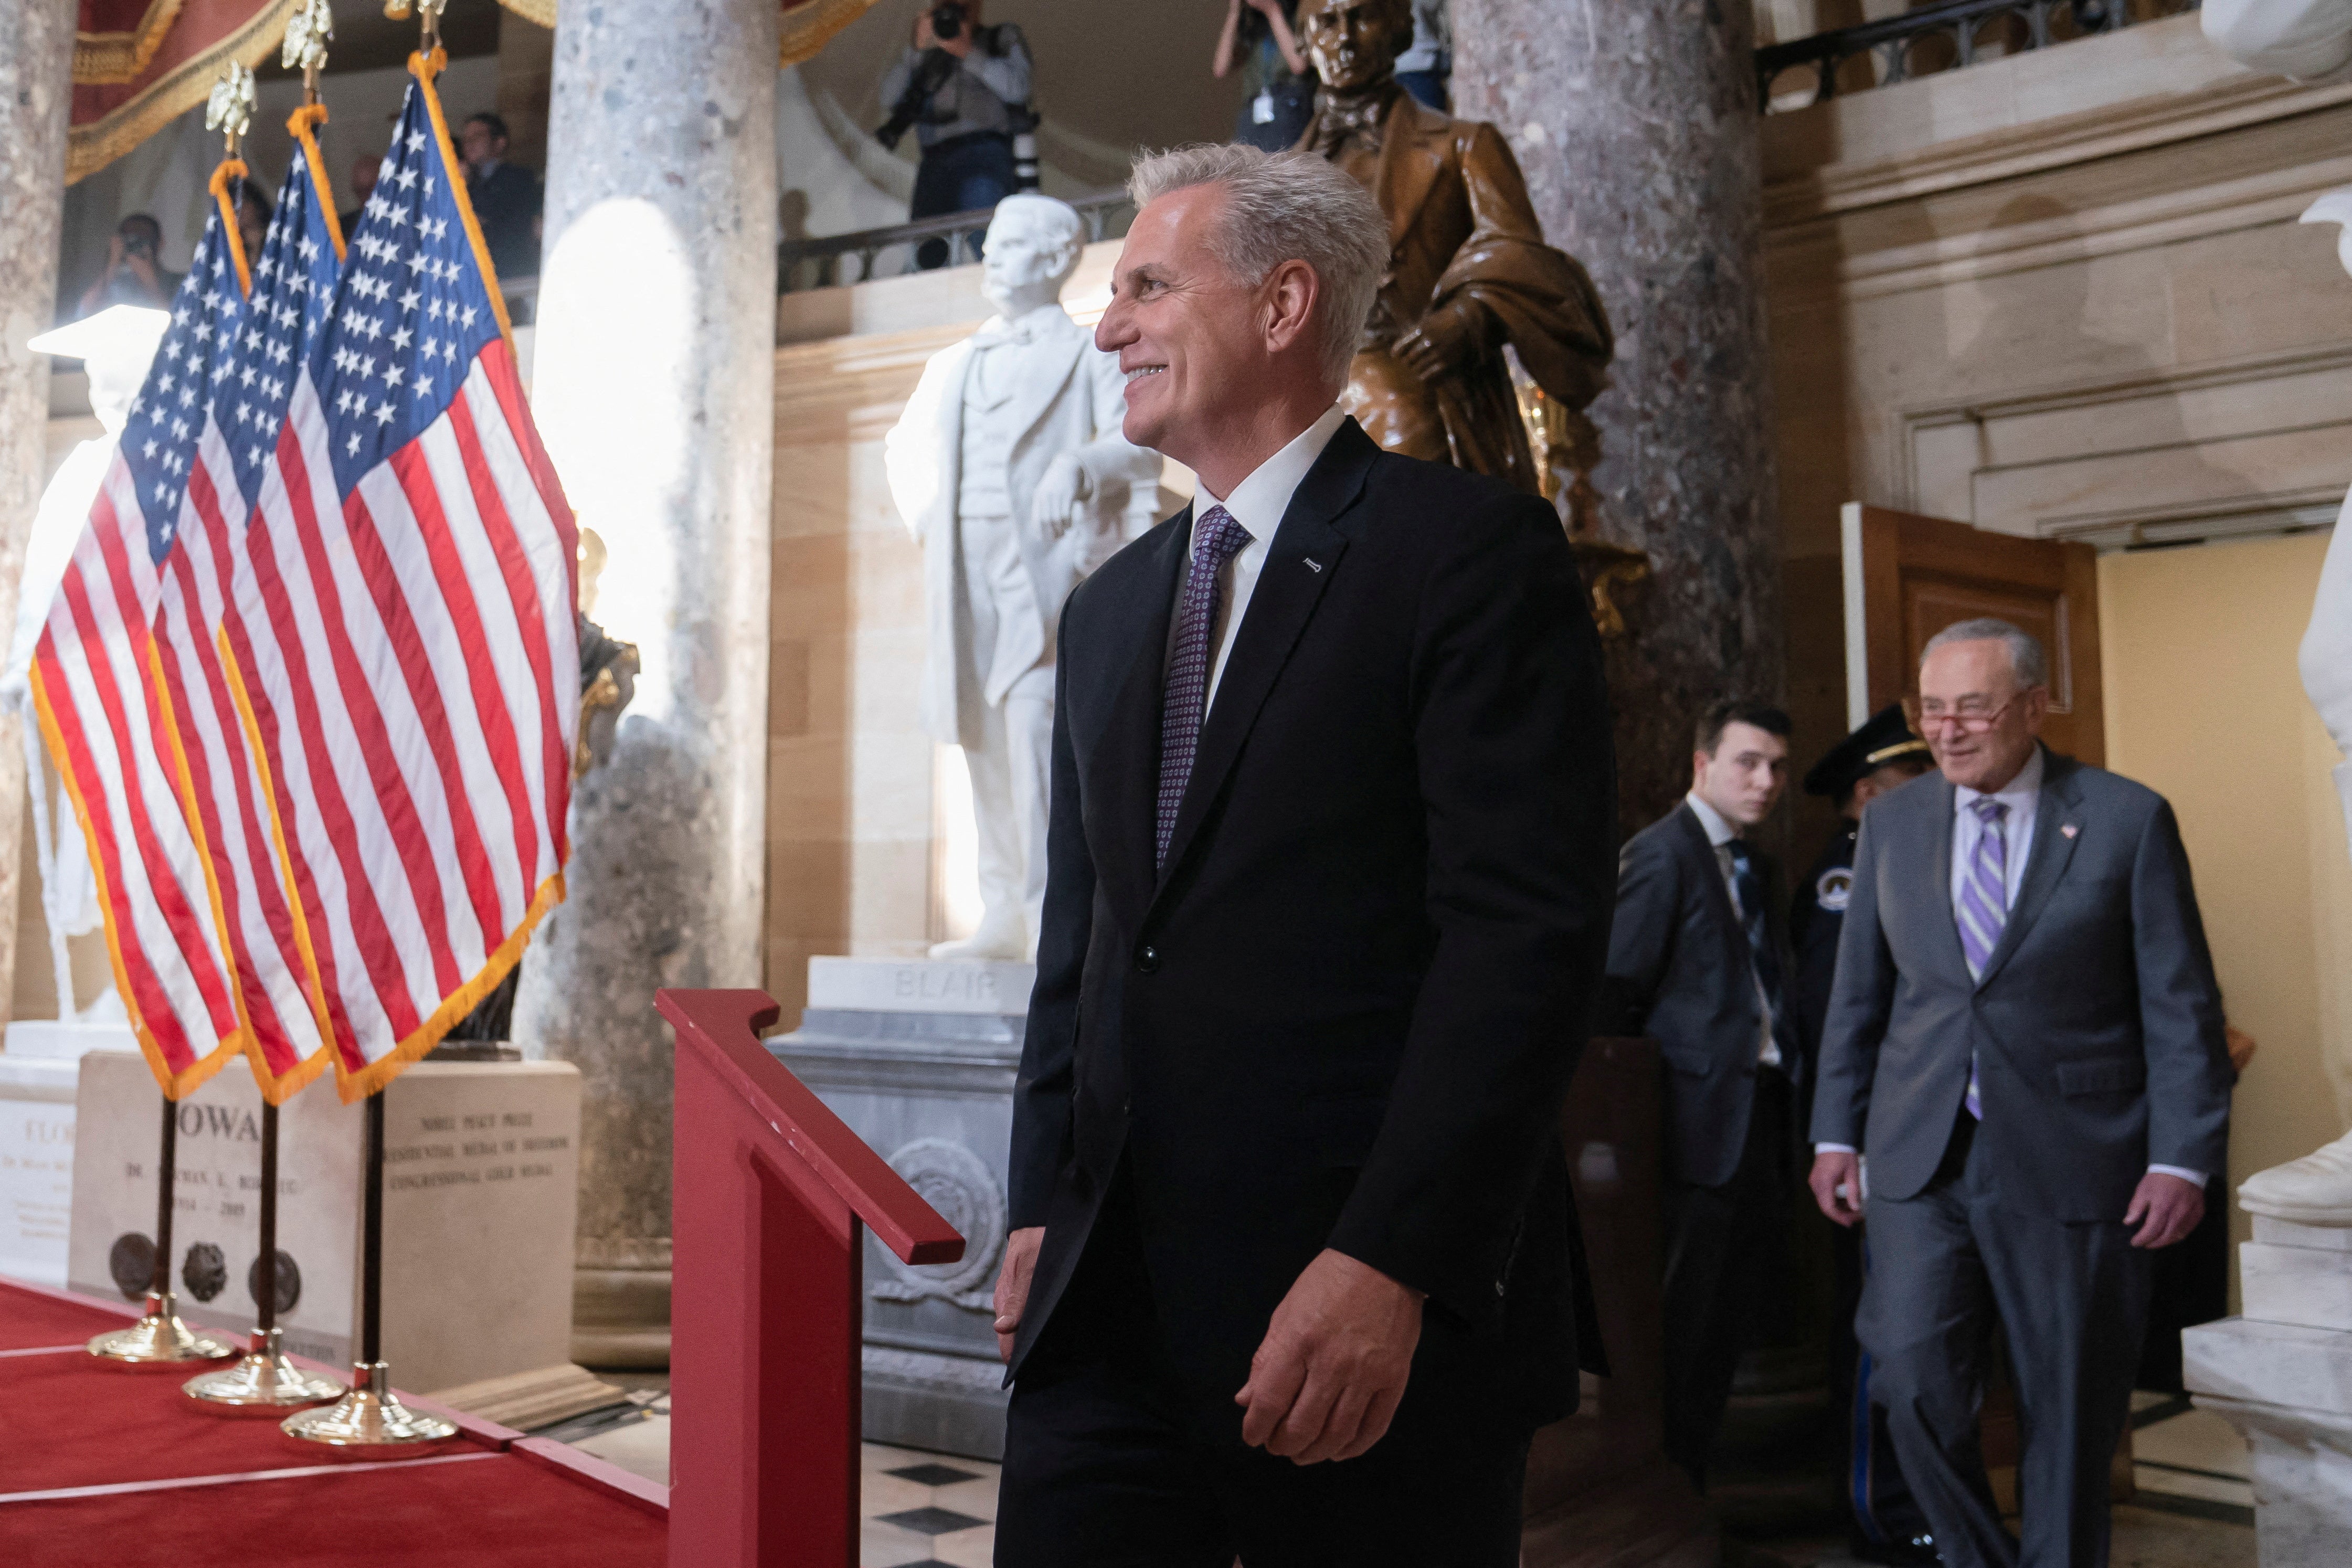 peaker of the House Kevin McCarthy (R-CA) arrives for a portrait unveiling ceremony for former Speaker of the House Paul Ryan on Capitol Hill in Washington, U.S